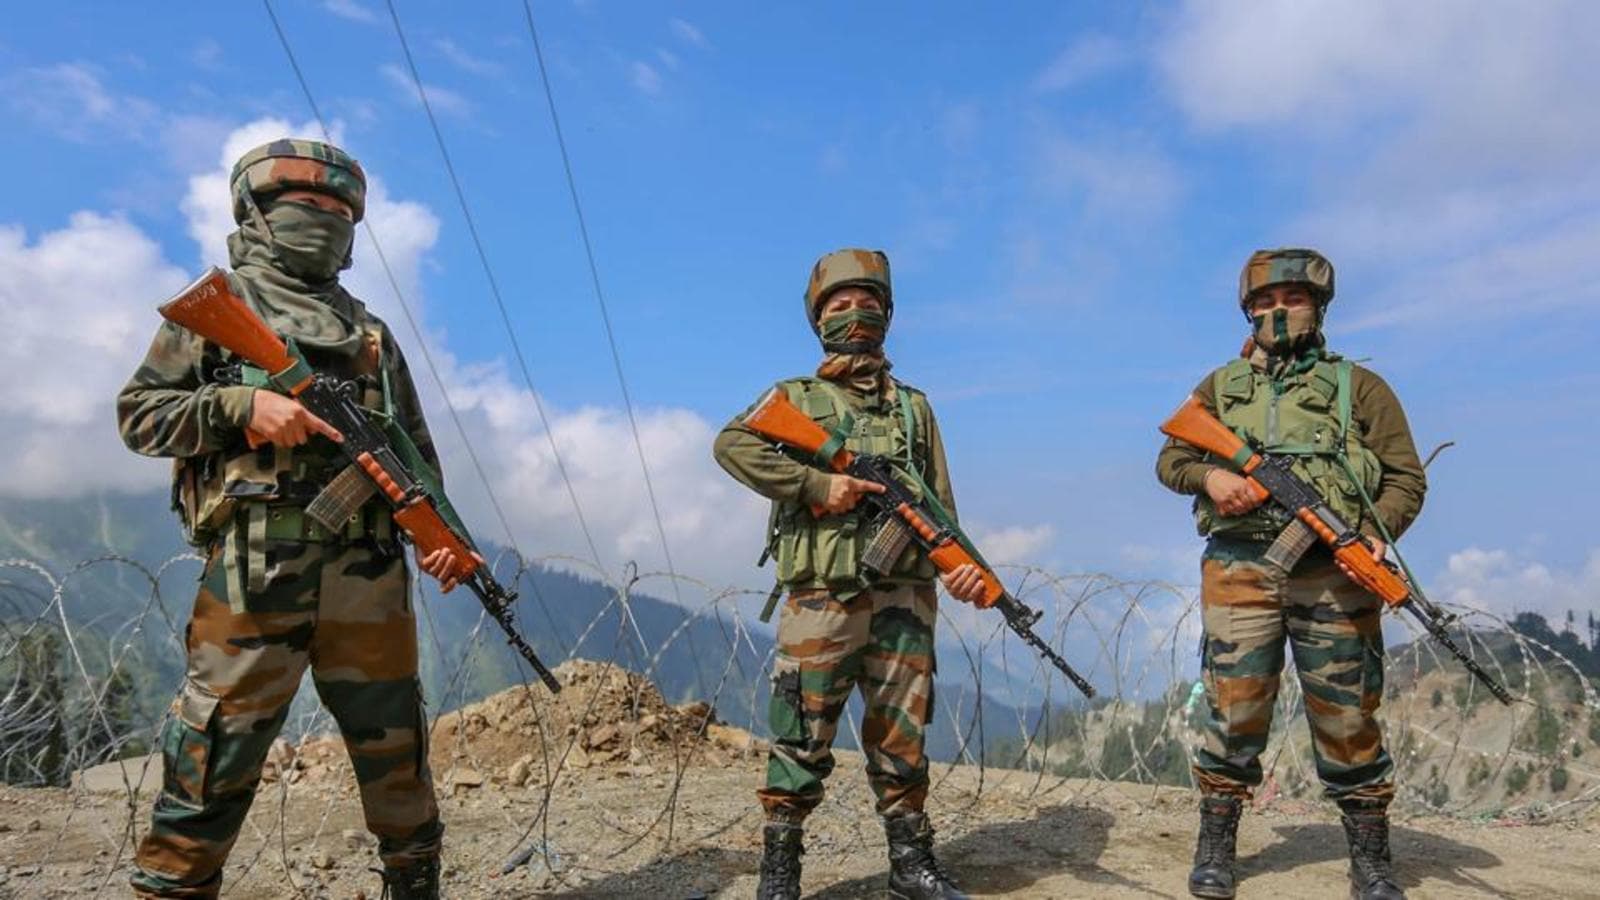 Indian Army To Get New Combat Uniform With 'Digital Disruptive' Pattern In  2022: Report